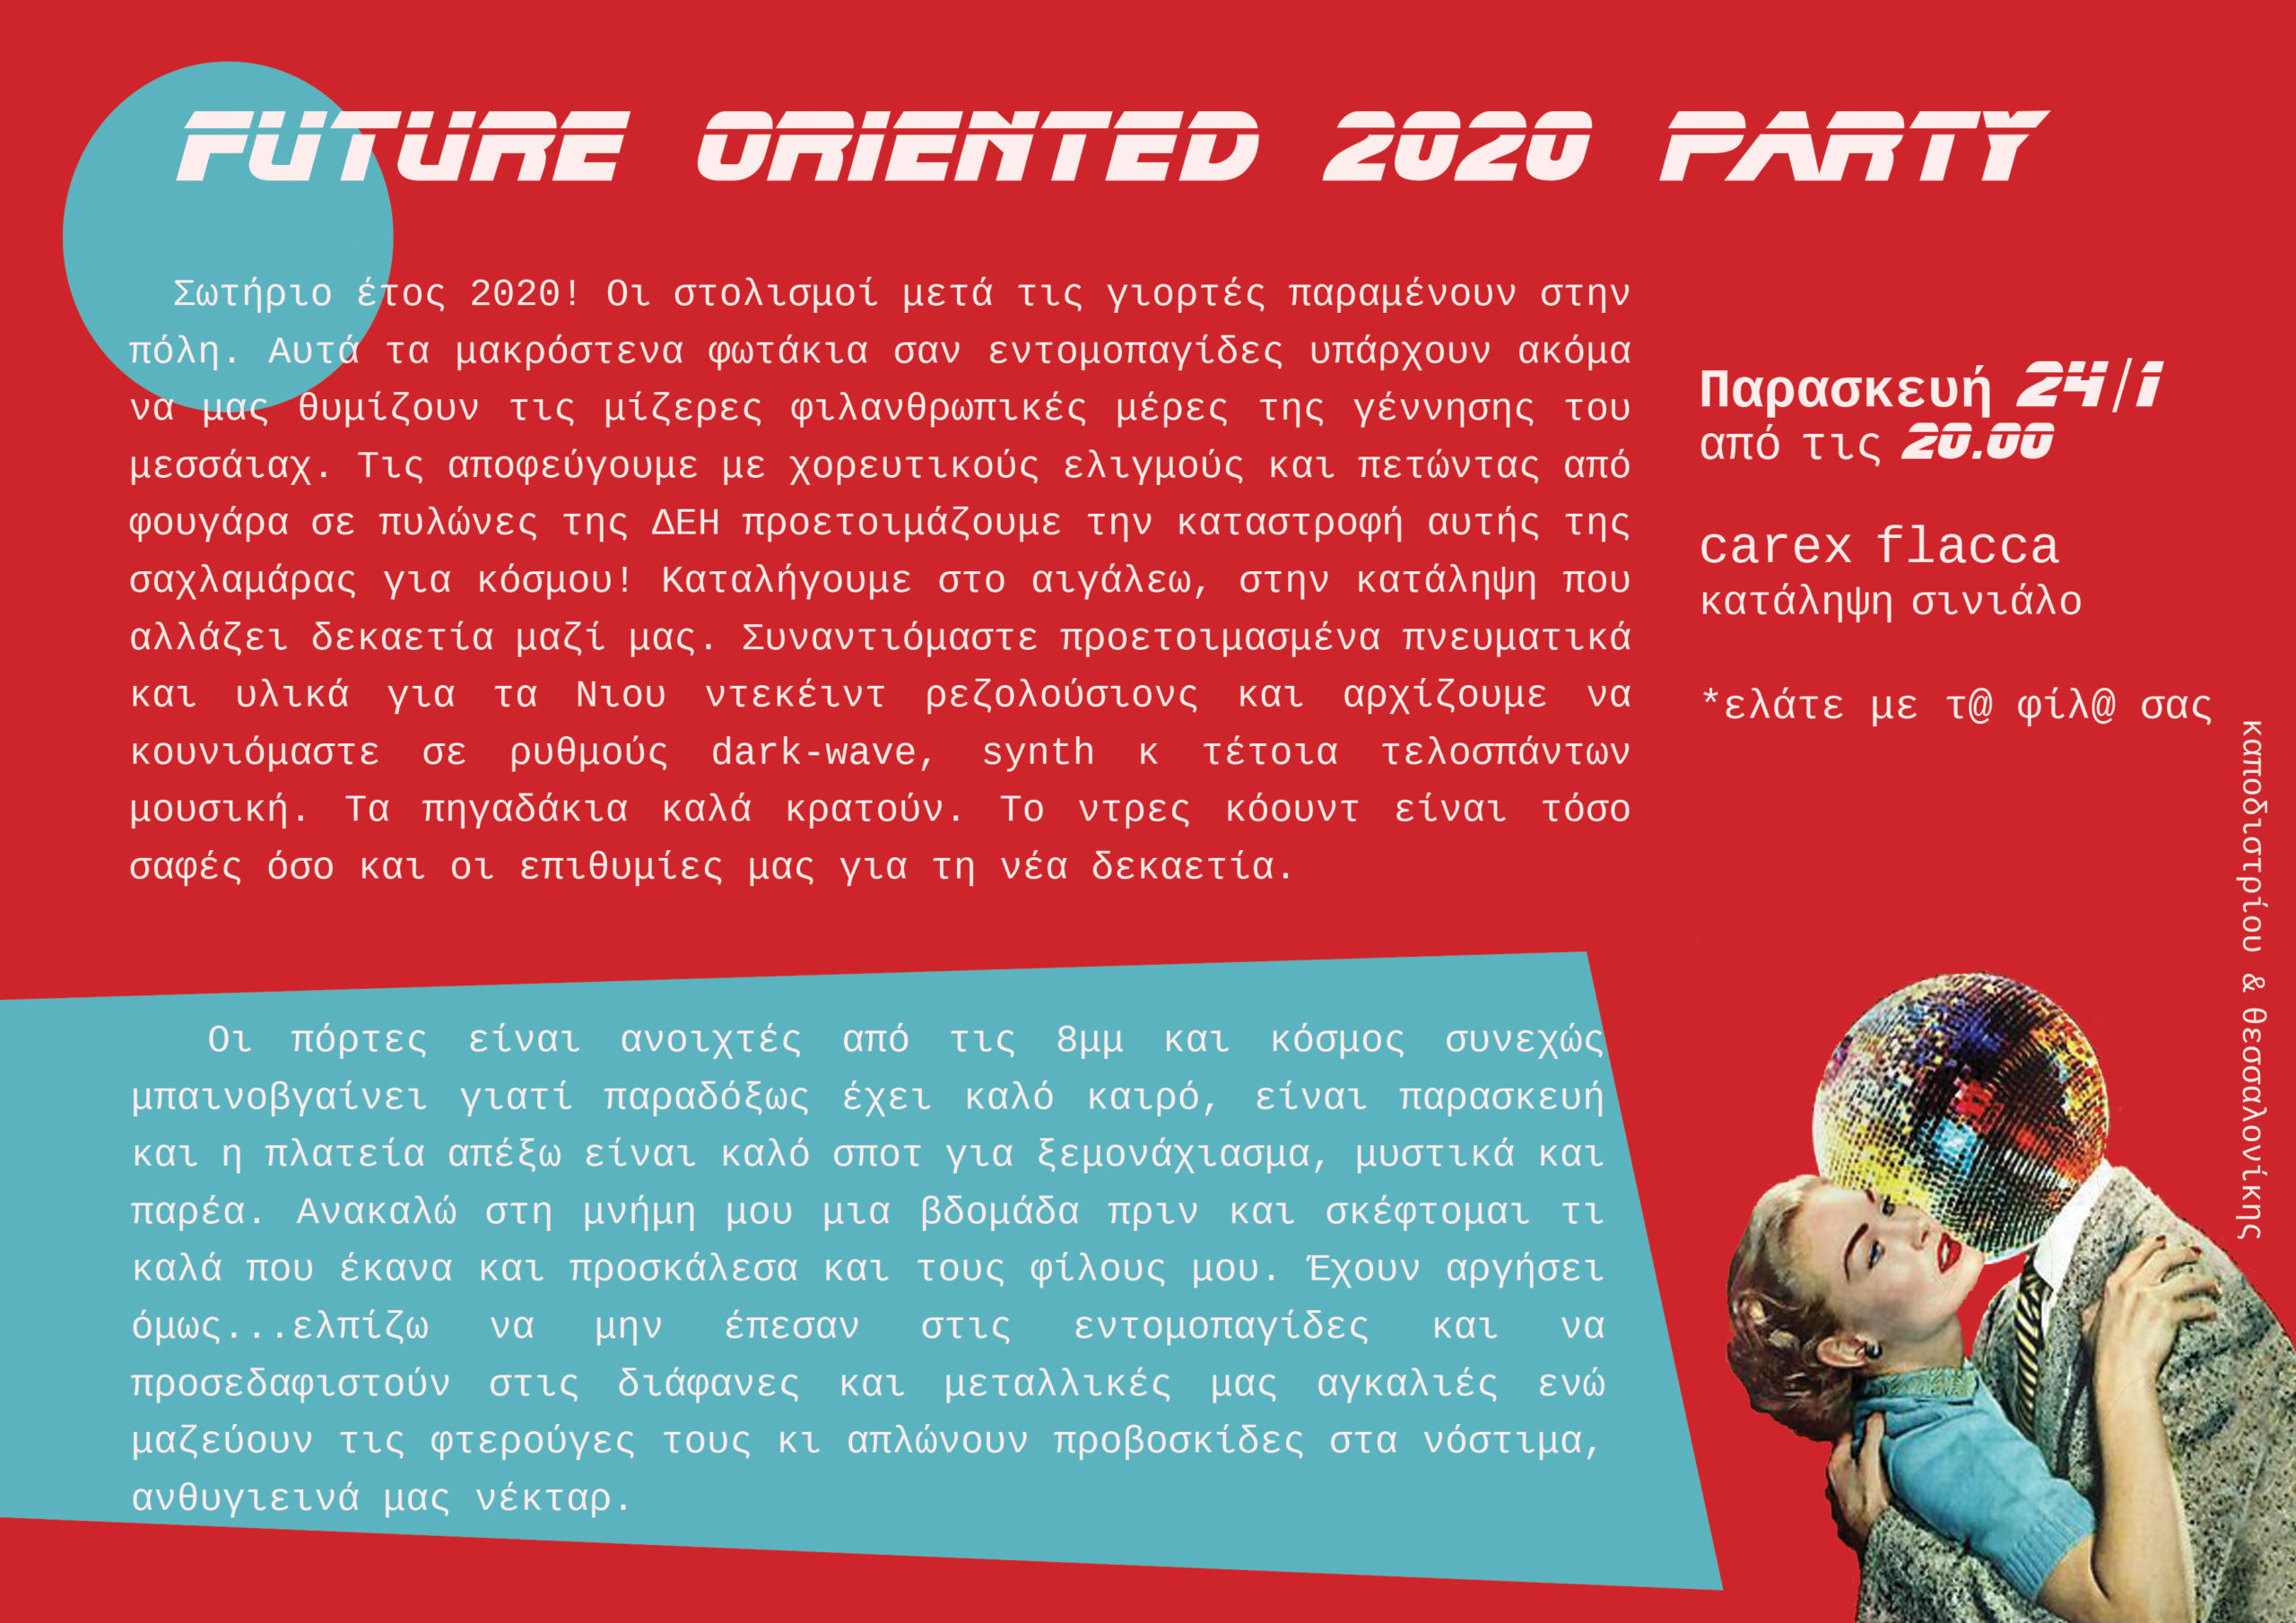 Future oriented 2020 party